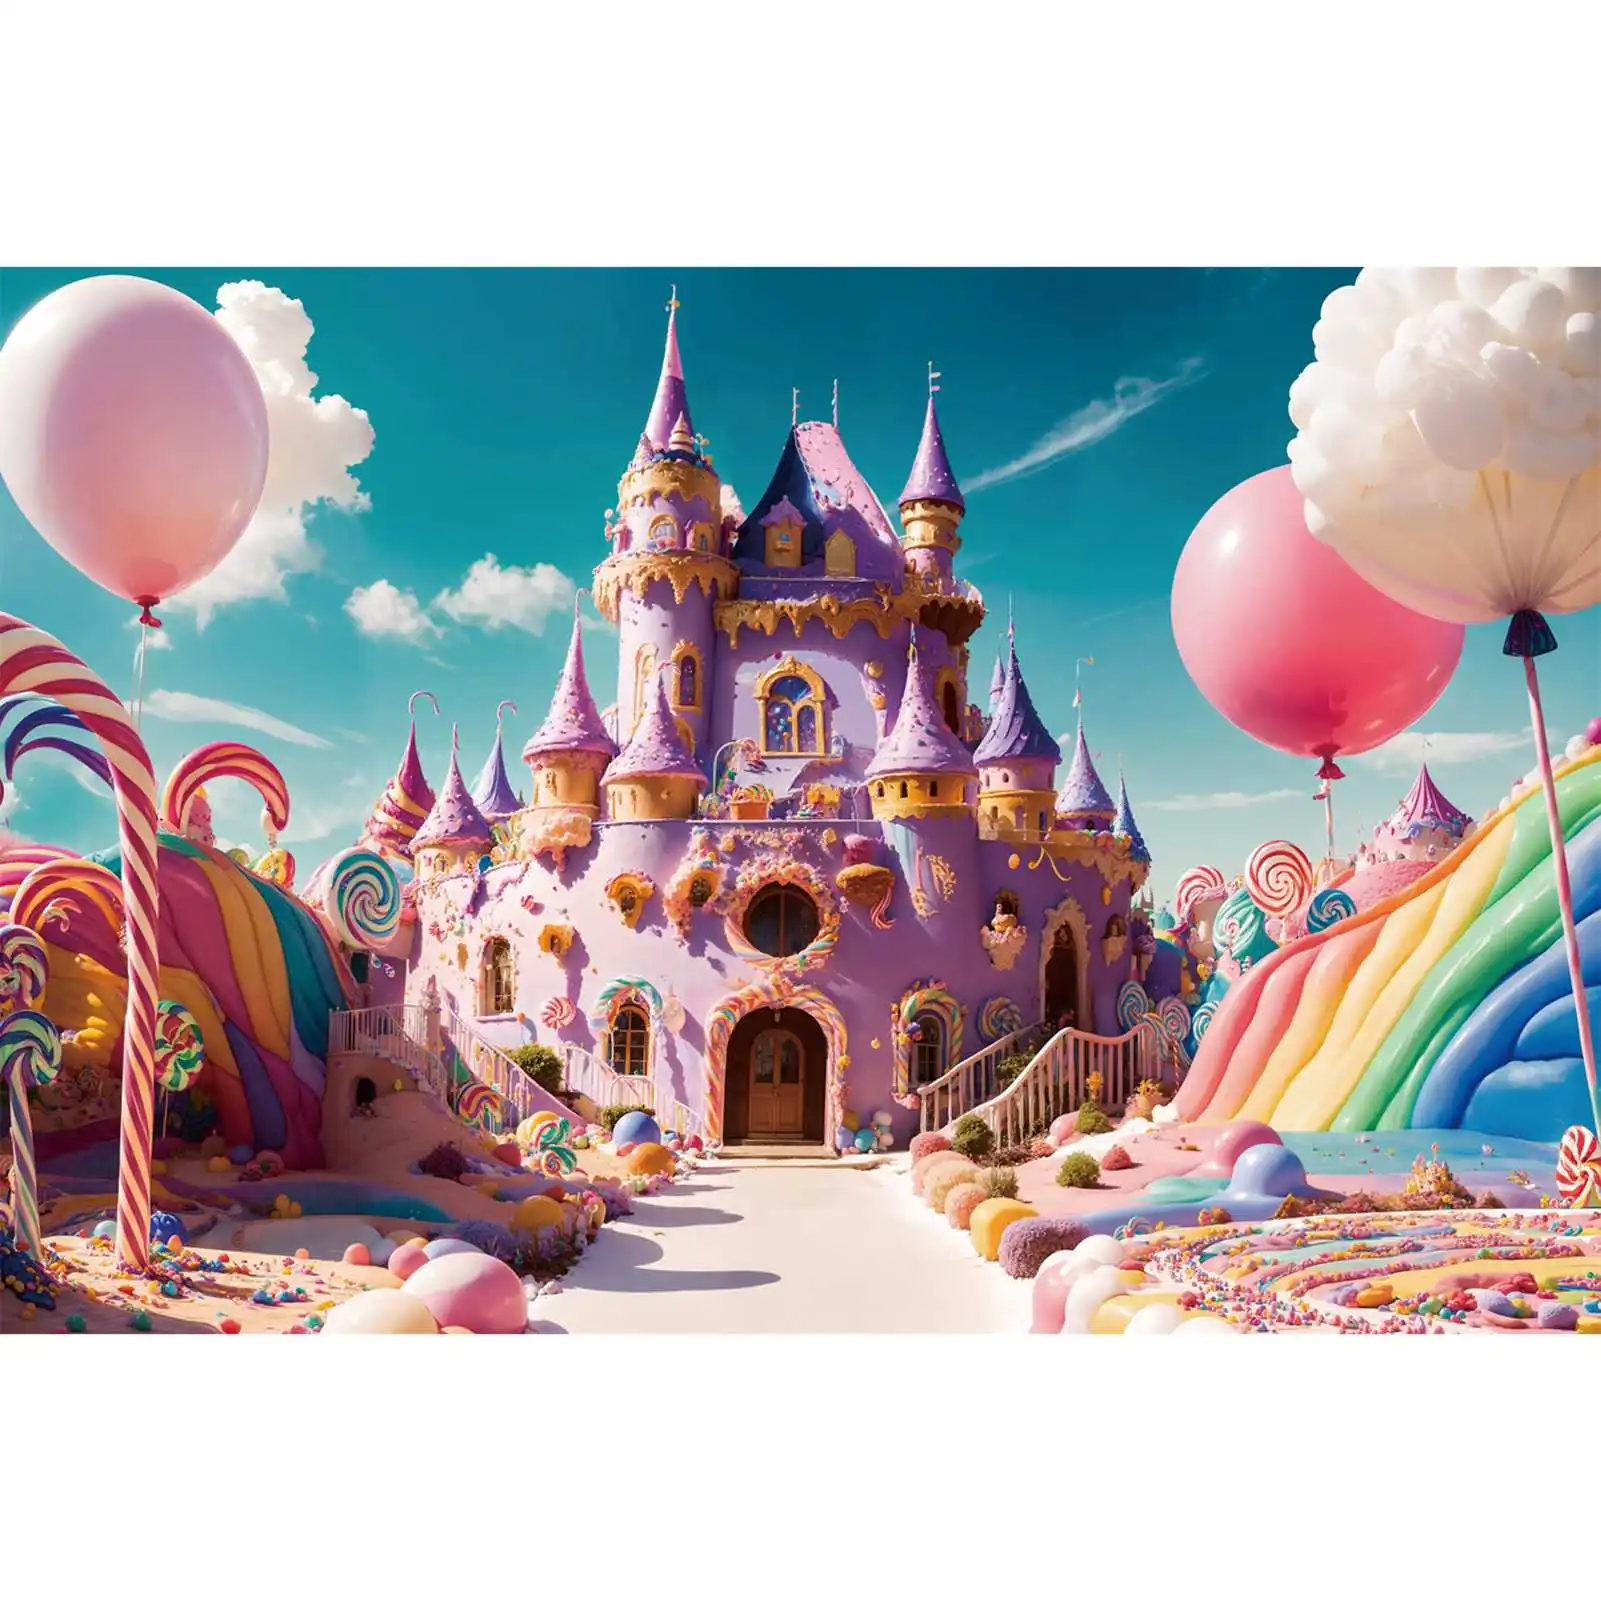 

Candyland Party Photography Backdrops Decorations Purple Castle Balloon Rainbow Cream Custom Baby Photo Backgrounds Banners